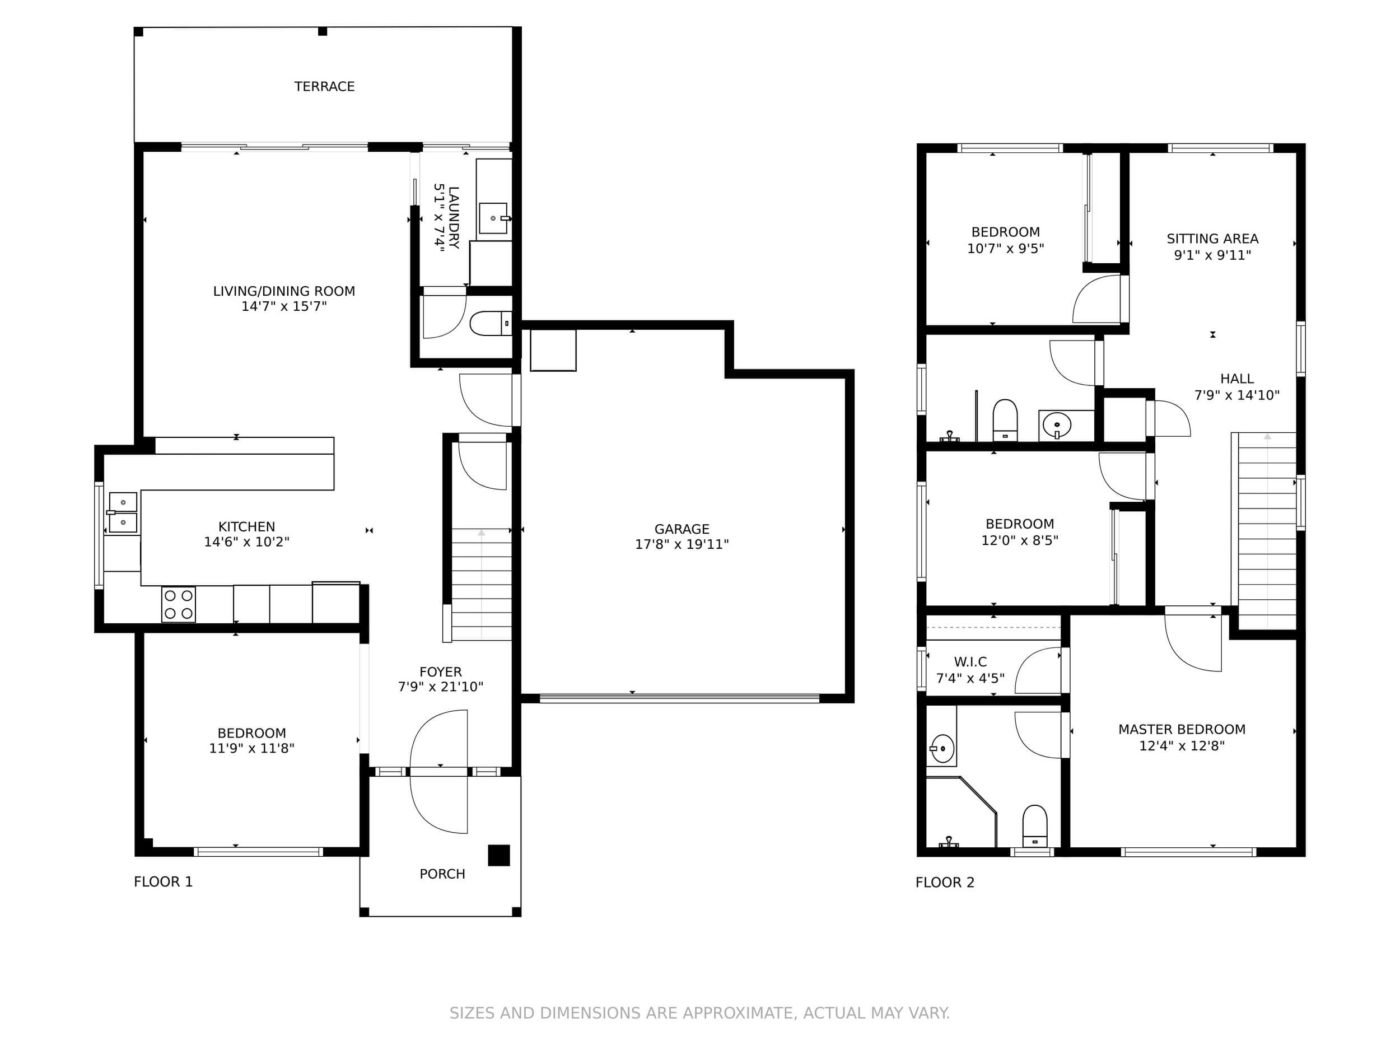 Real estate floor plan of a house for a listing for sale